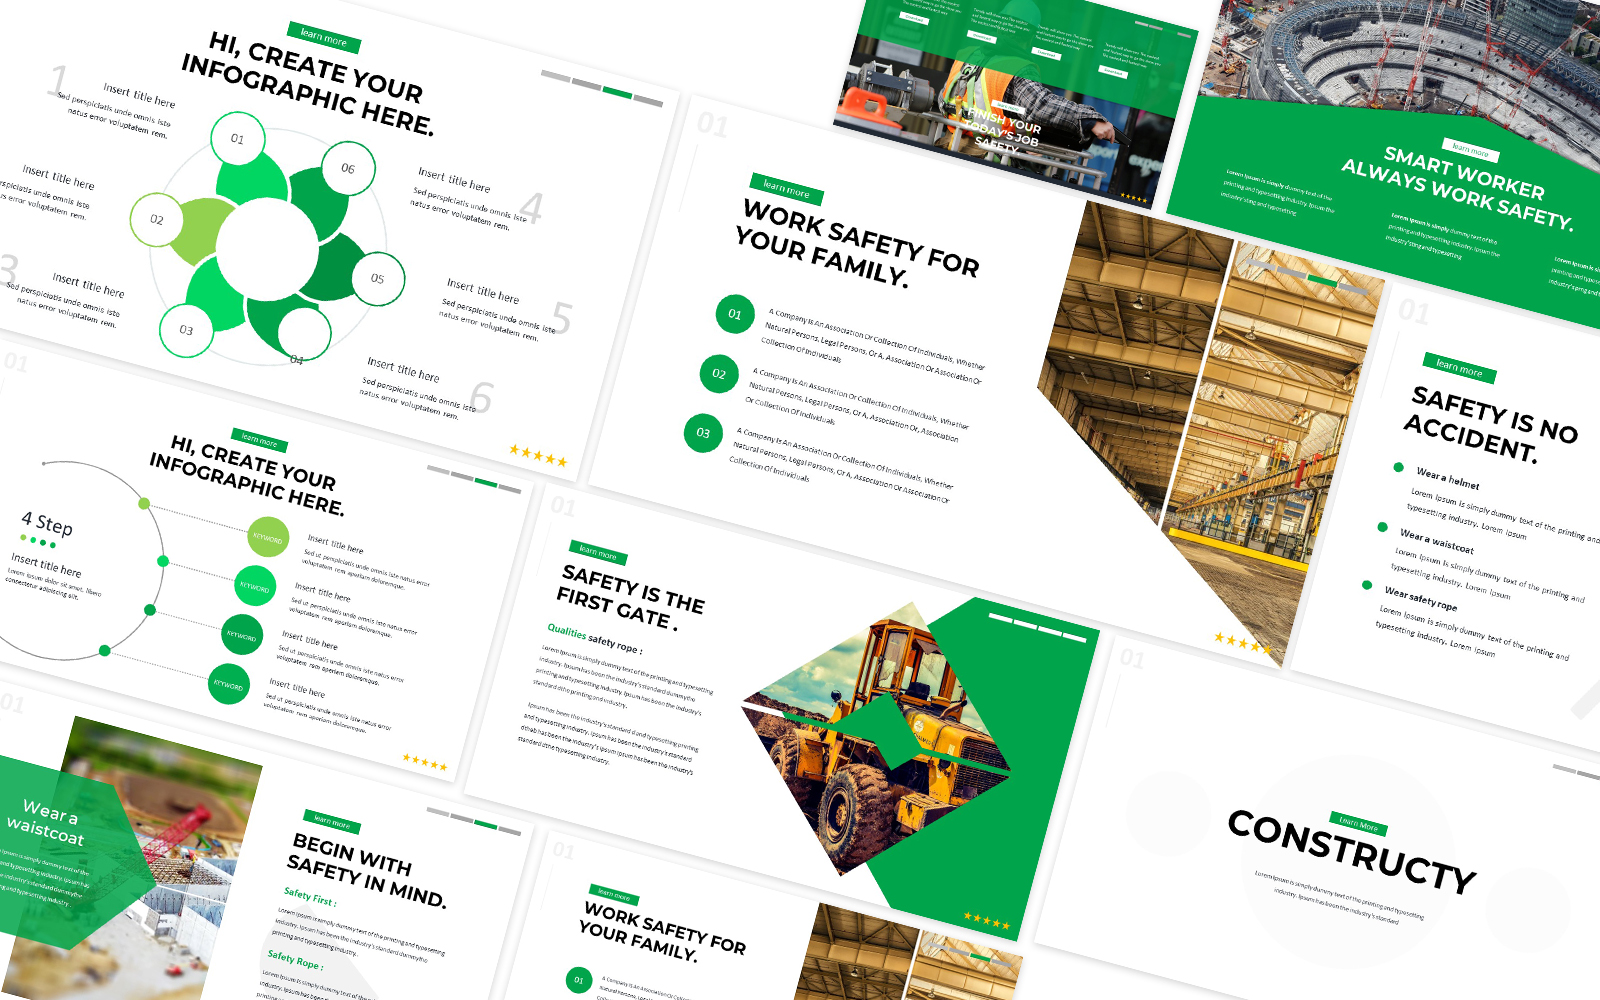 Constructy Construction Keynote Template